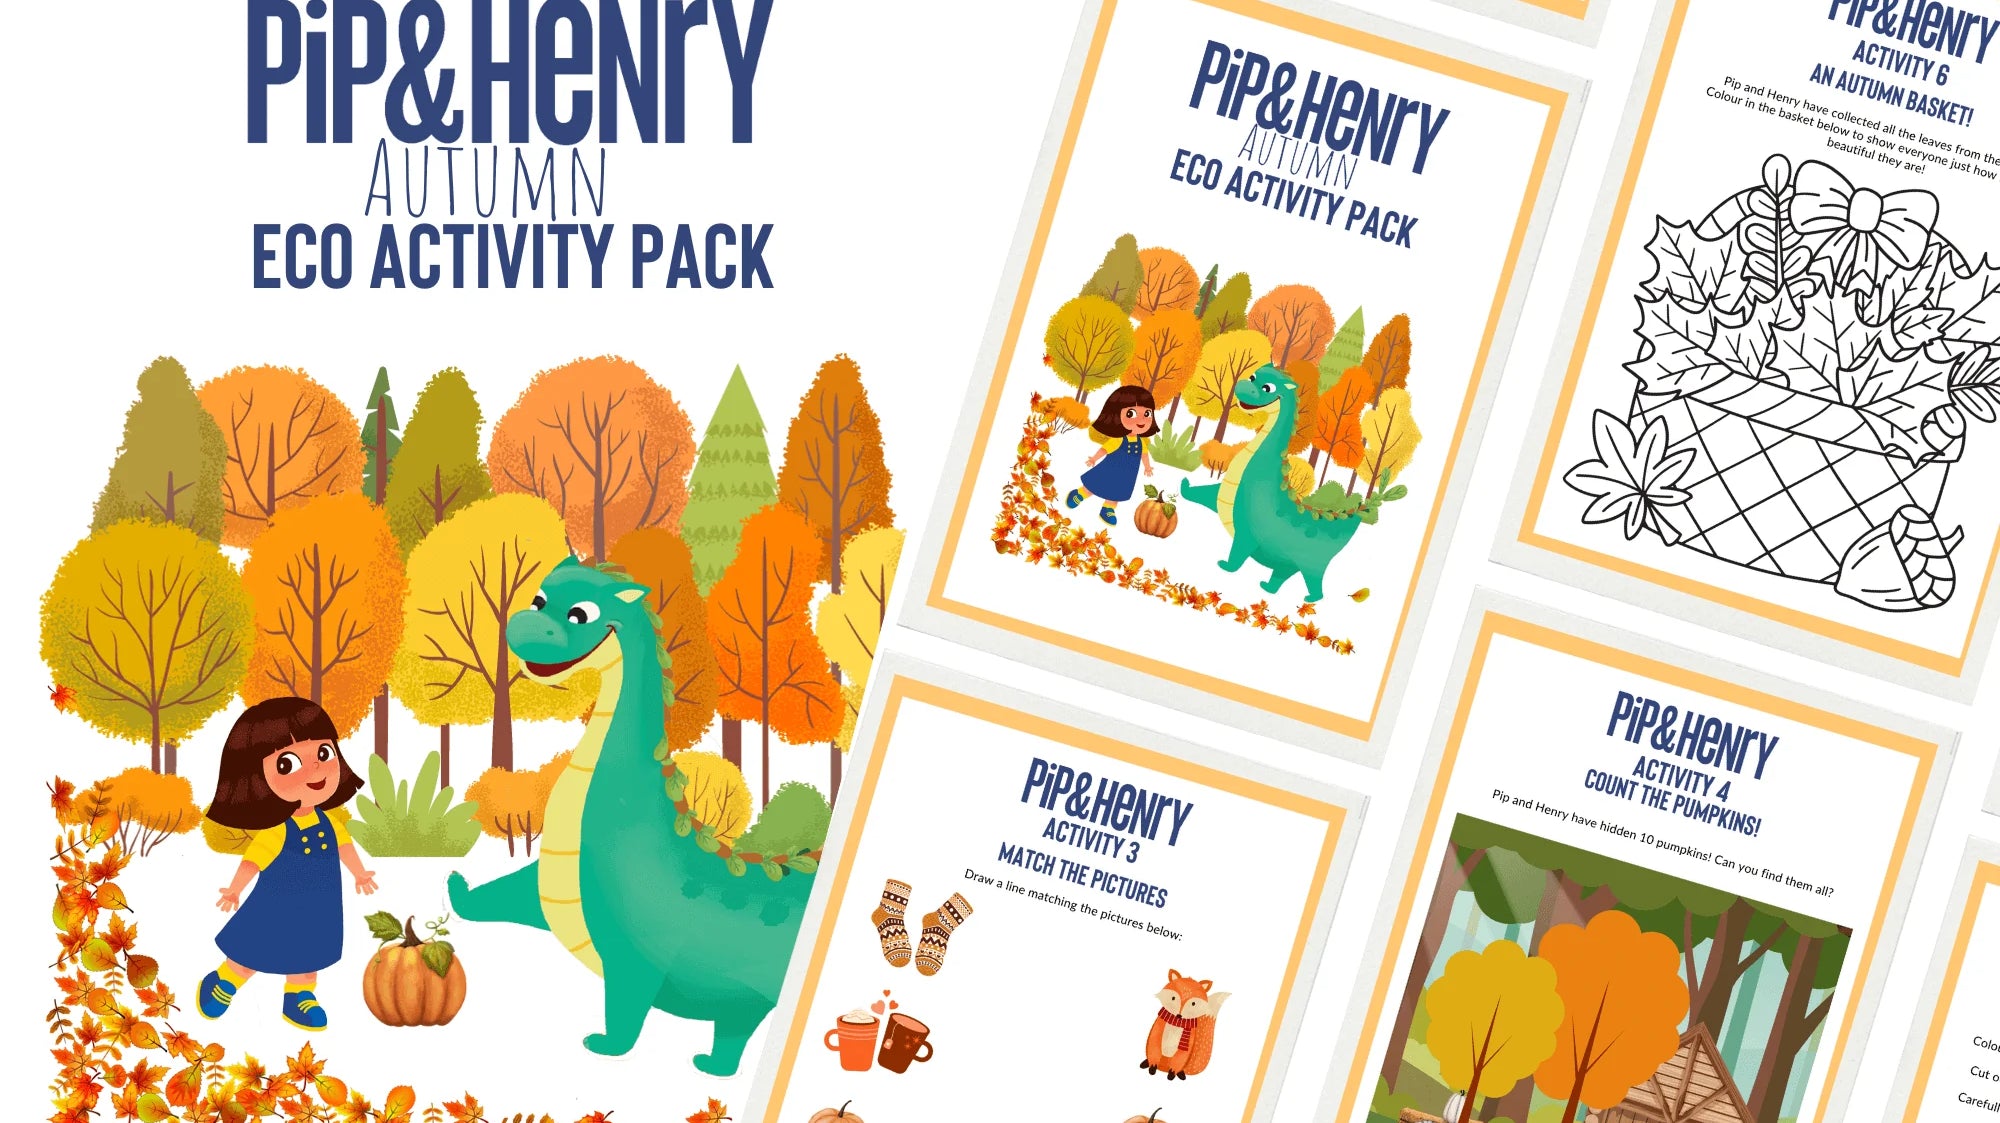 Our Autumn Eco Activity Pack Is Here!